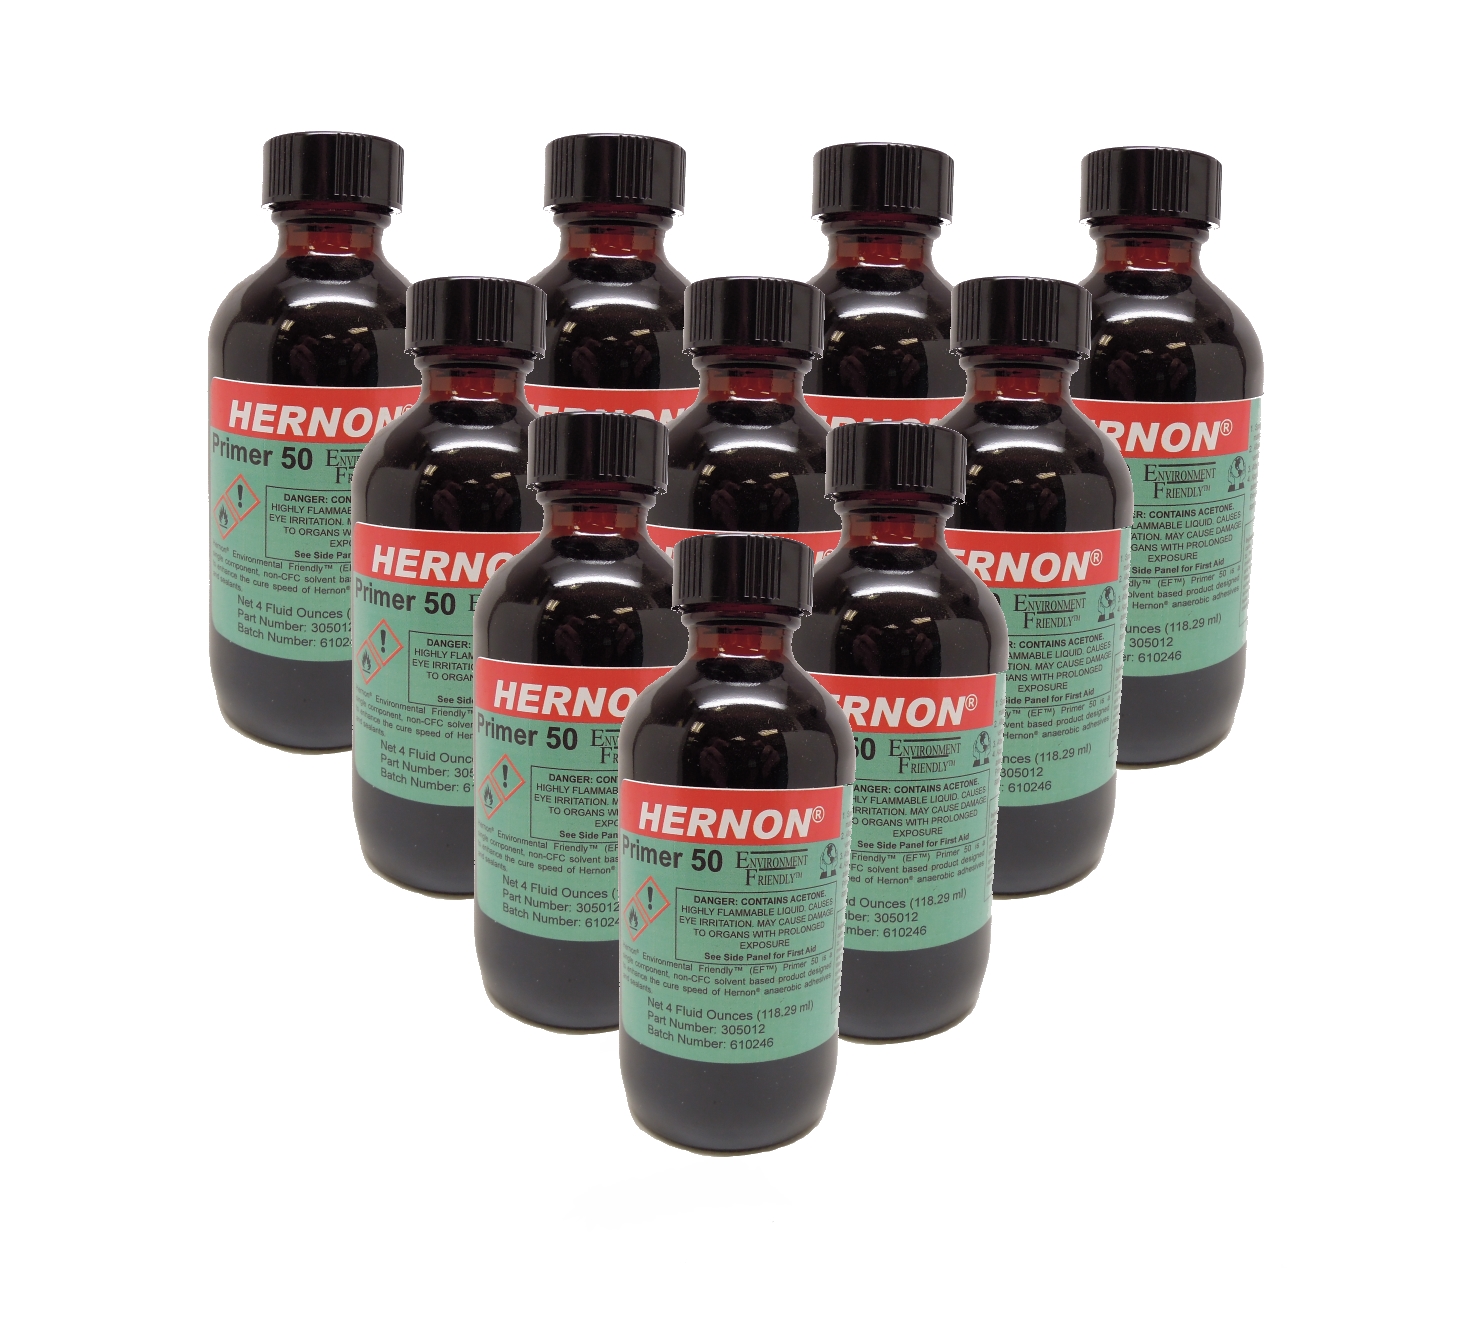 Hernon EF PRIMER 50 4-10 Adhesive - 4 oz. Bottle with pump 10-pack - Fast Shipping